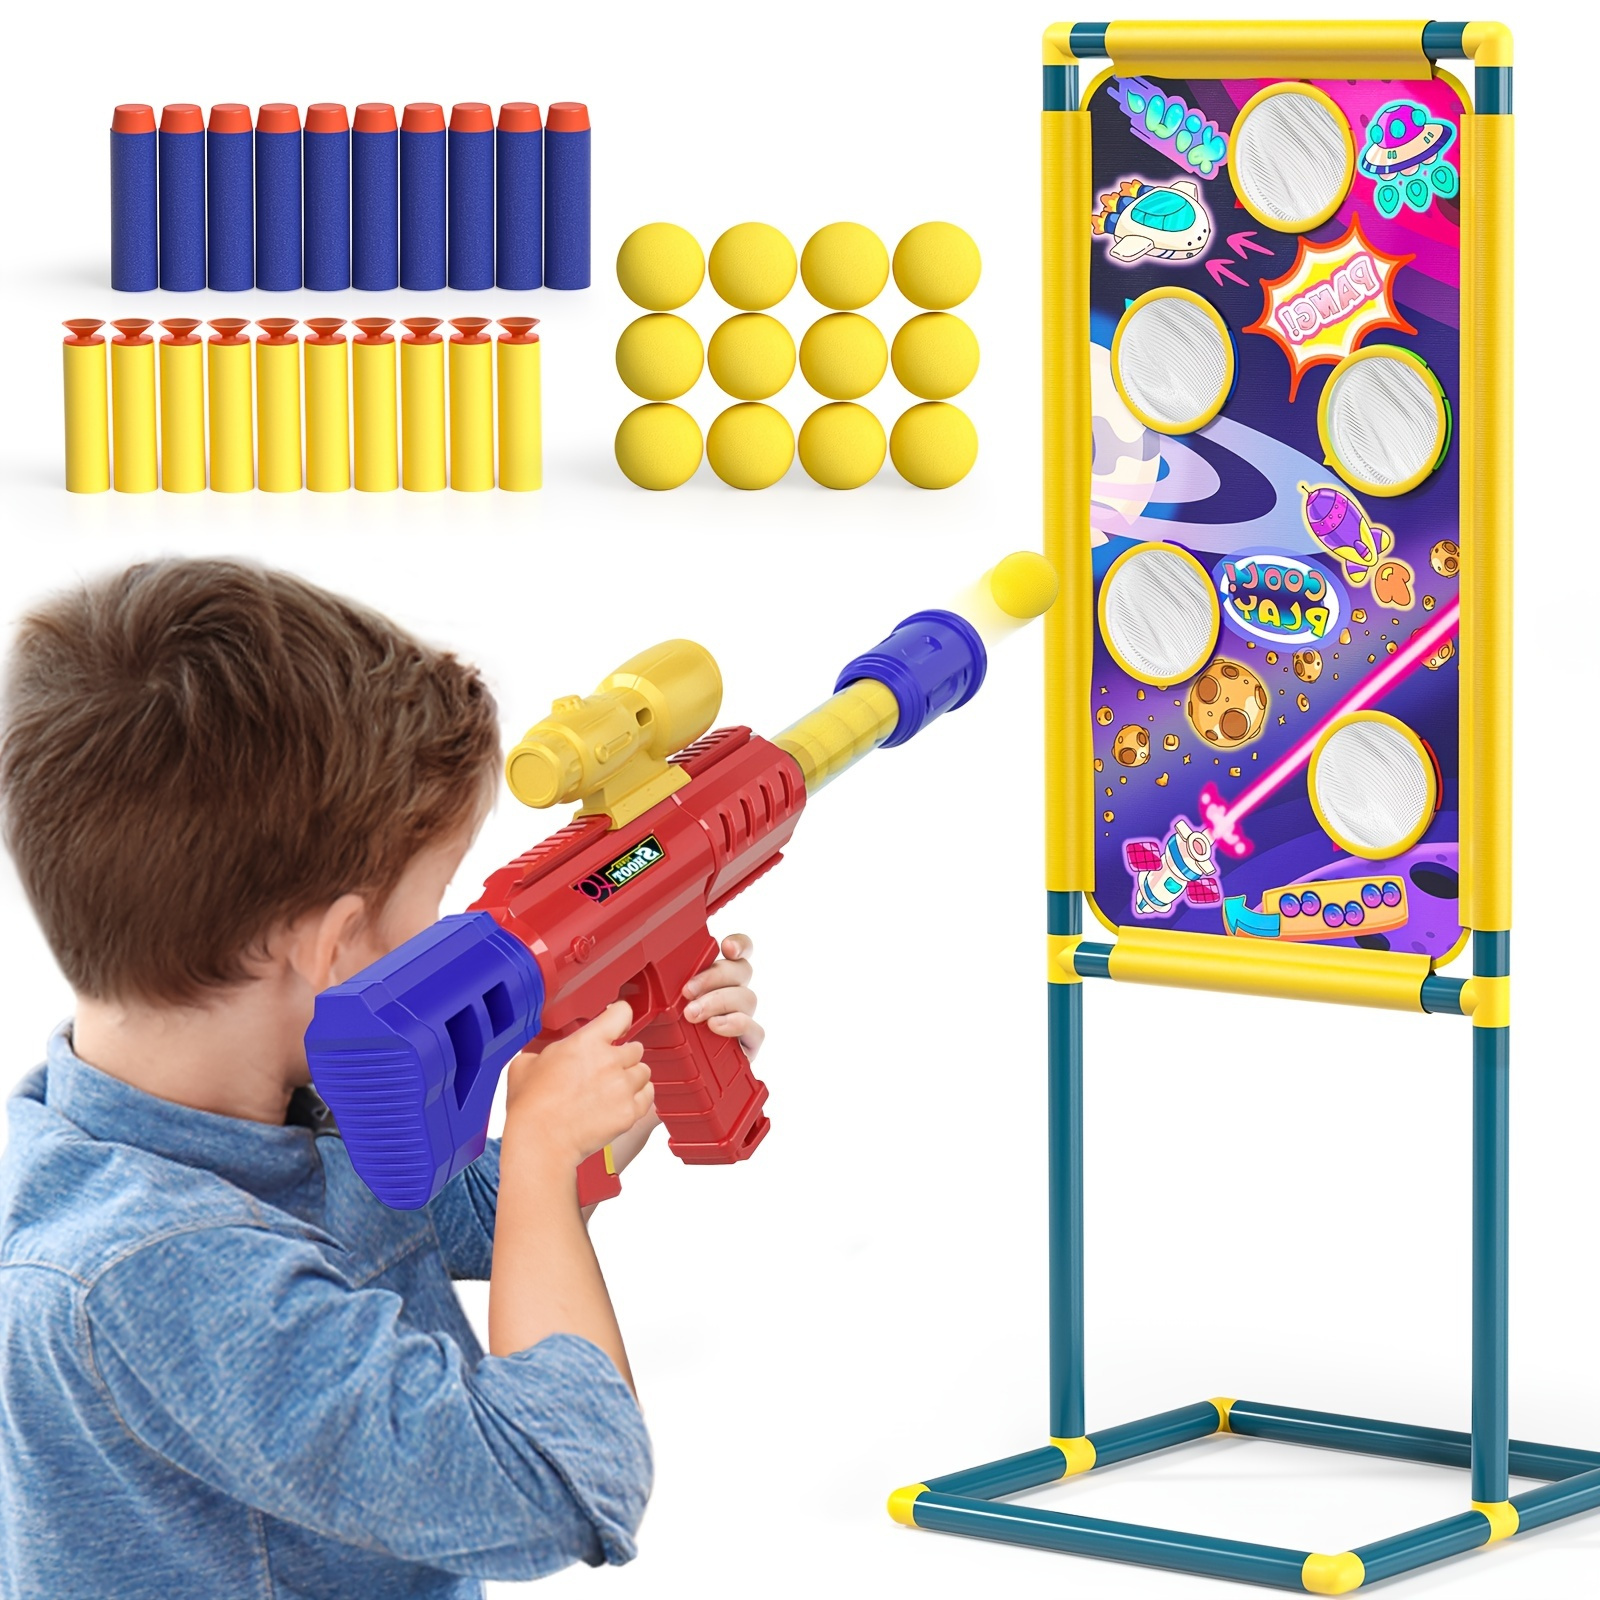 * 2-in-1 Shooting Game Toy For Kids: Foam Ball Popper Air Guns With Target  & 30 Foam Balls/Darts - Indoor/Outdoor Fun For Ages 4-10+ Boys & Girls!  Christmas, Halloween, Thanksgiving Gift